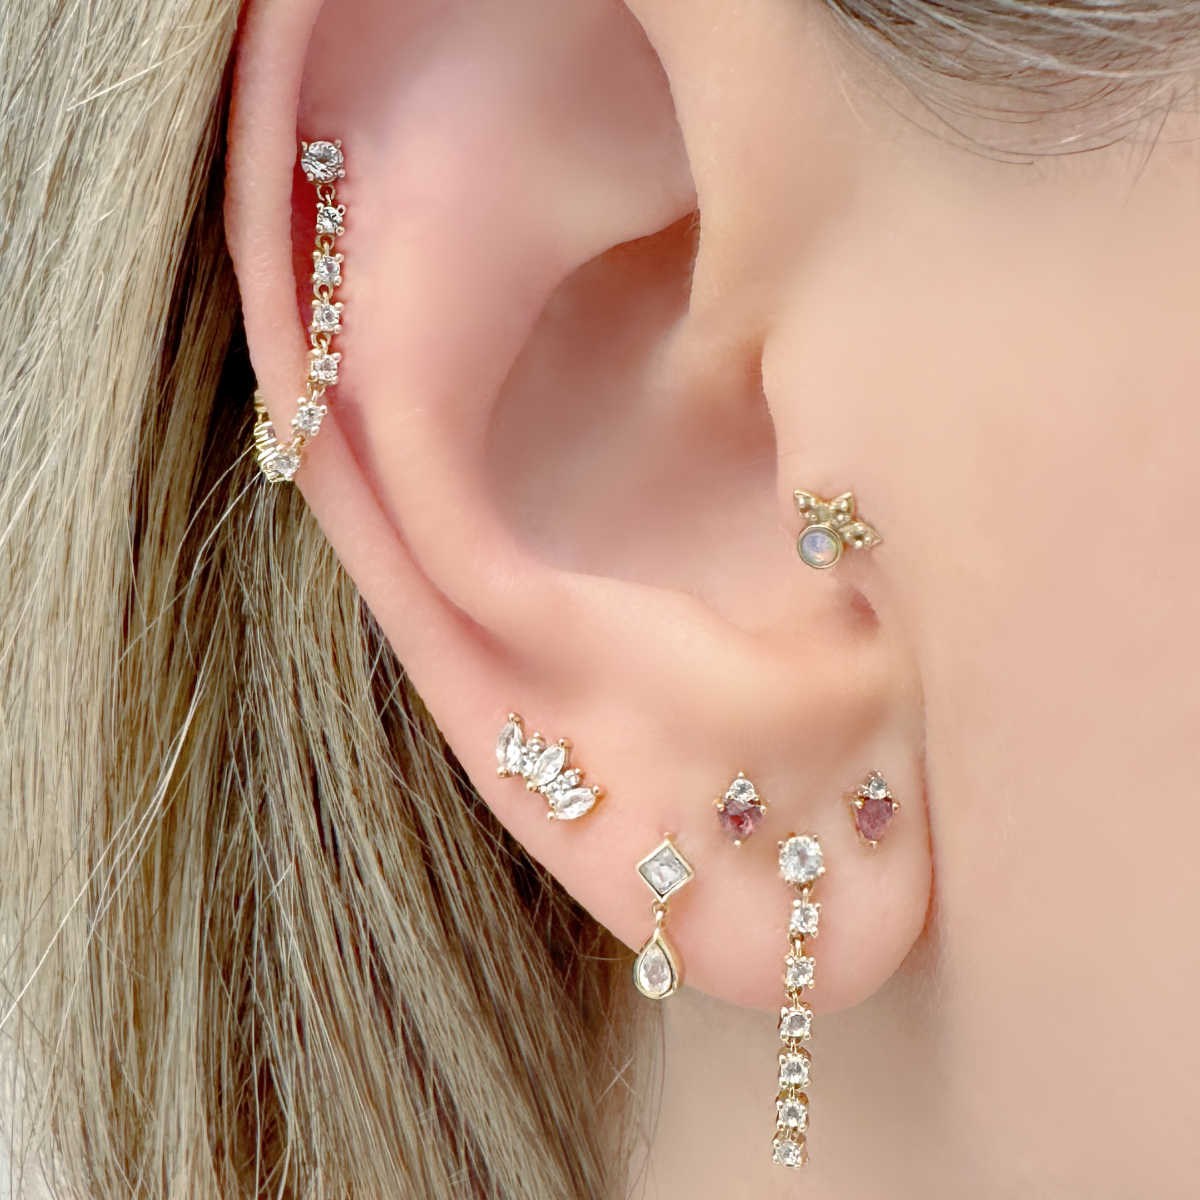 Flat Back Cartilage Earrings, 14k Gold, Helix, Tragus, Conch Studs – Two of  Most